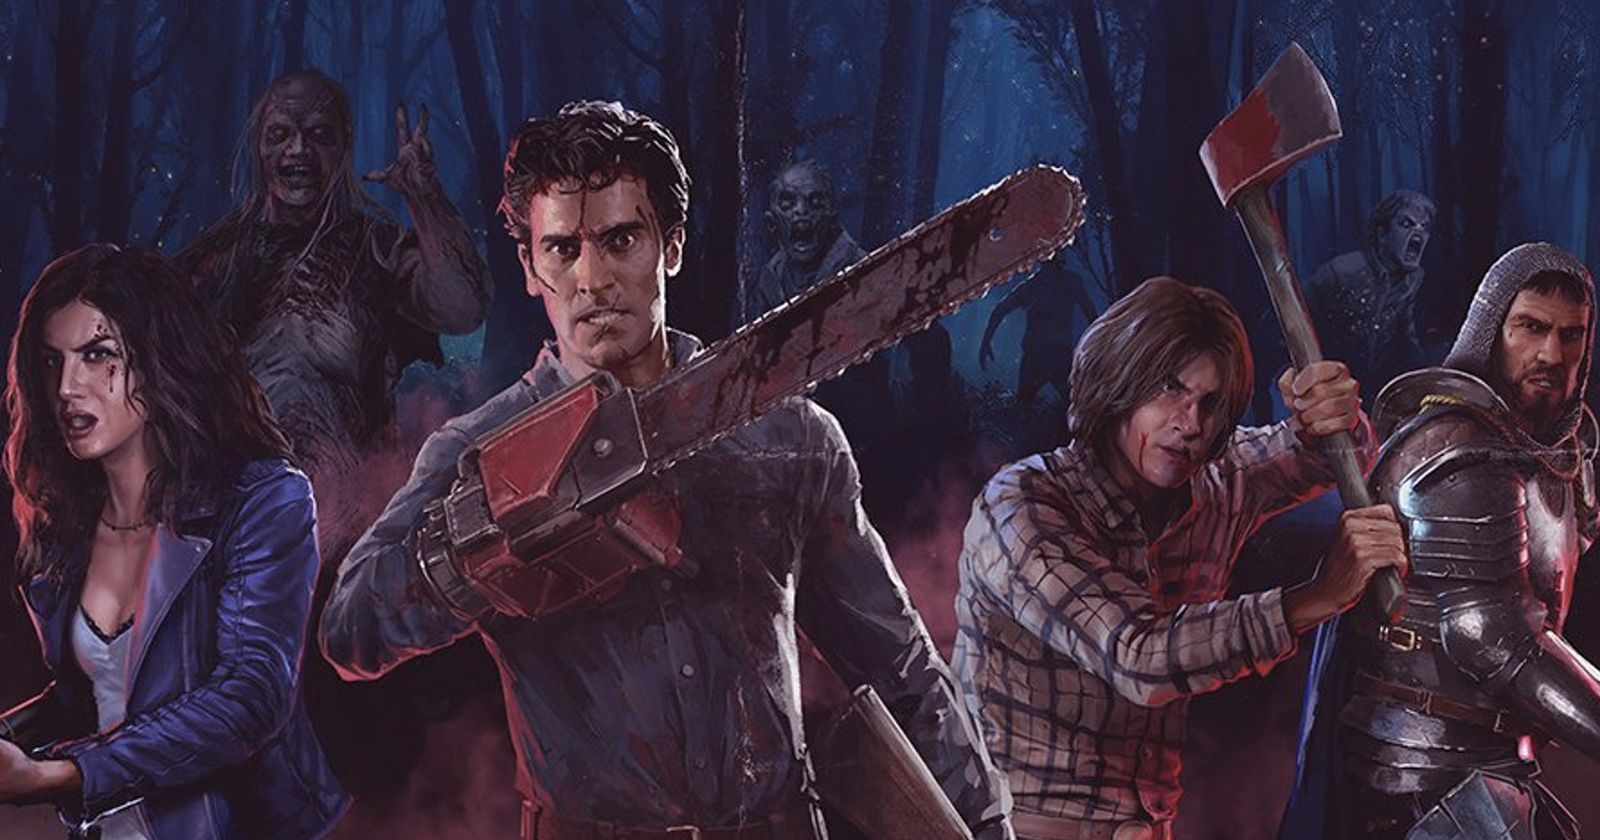 Can I play Evil Dead solo?